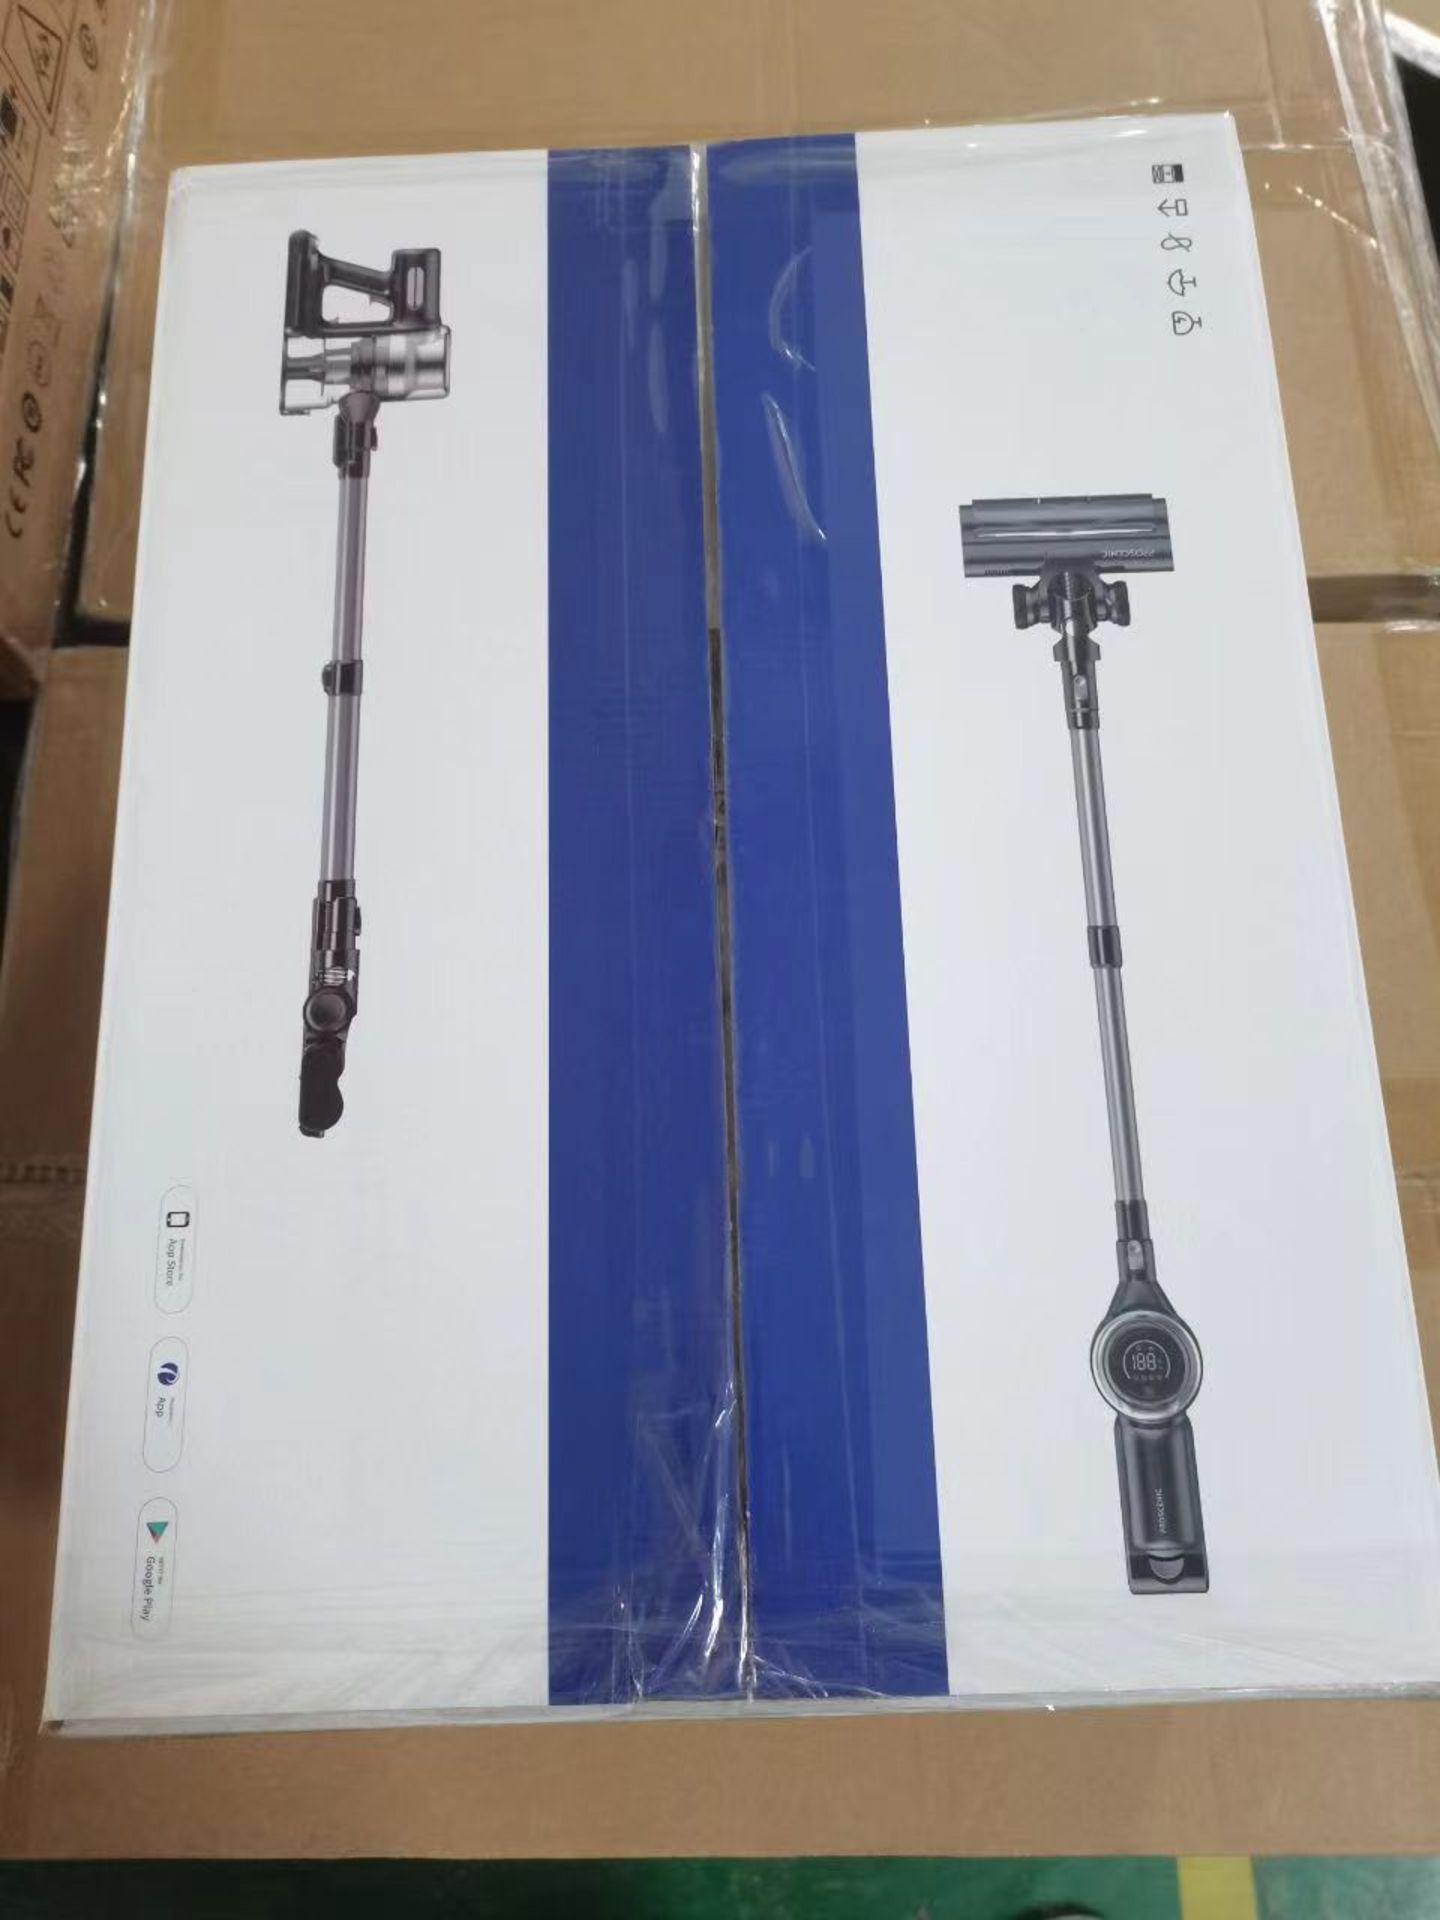 New & Boxed Proscenic P12 Cordless Vacuum Cleaner, 33Kpa Stick Vacuum Cleaner with Touch Display, - Bild 6 aus 11